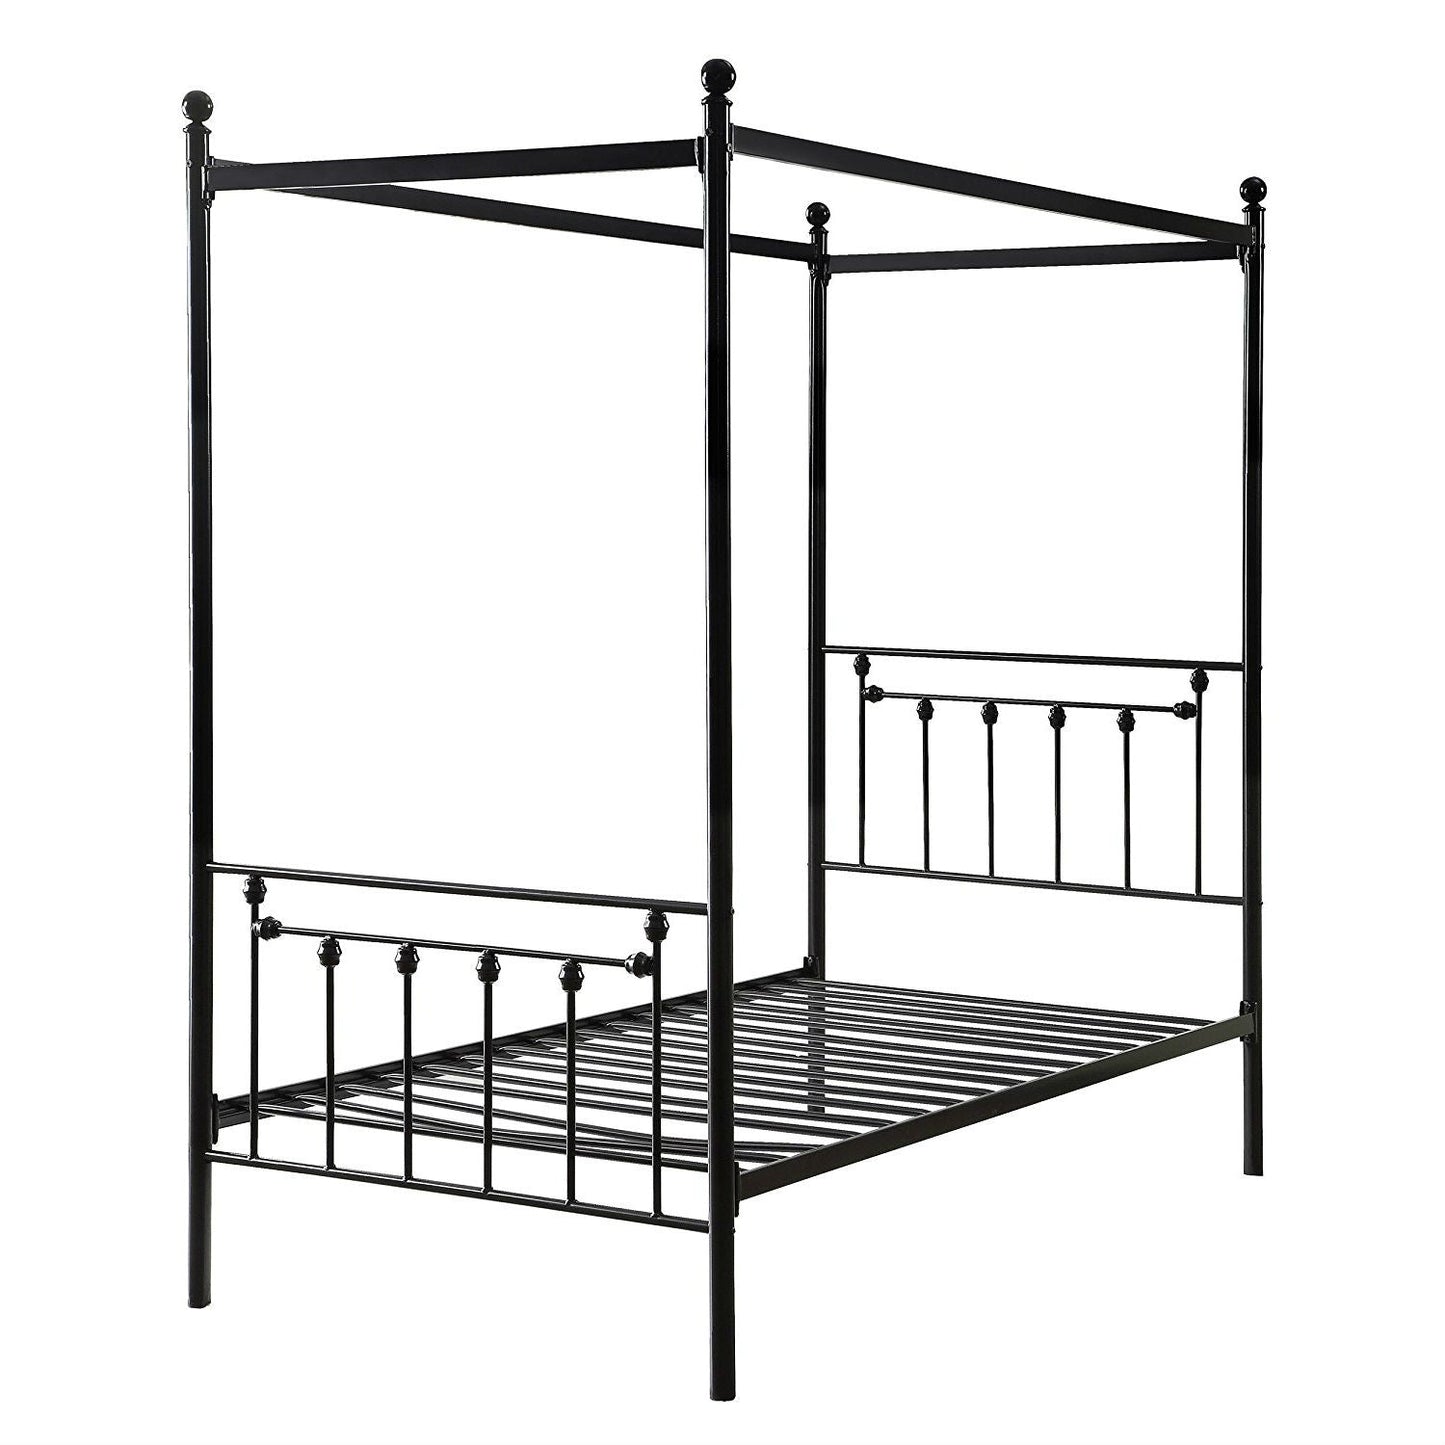 Bedroom > Bed Frames > Canopy Beds - Twin Size Sturdy Metal Canopy Bed Frame In Black Metal Finish